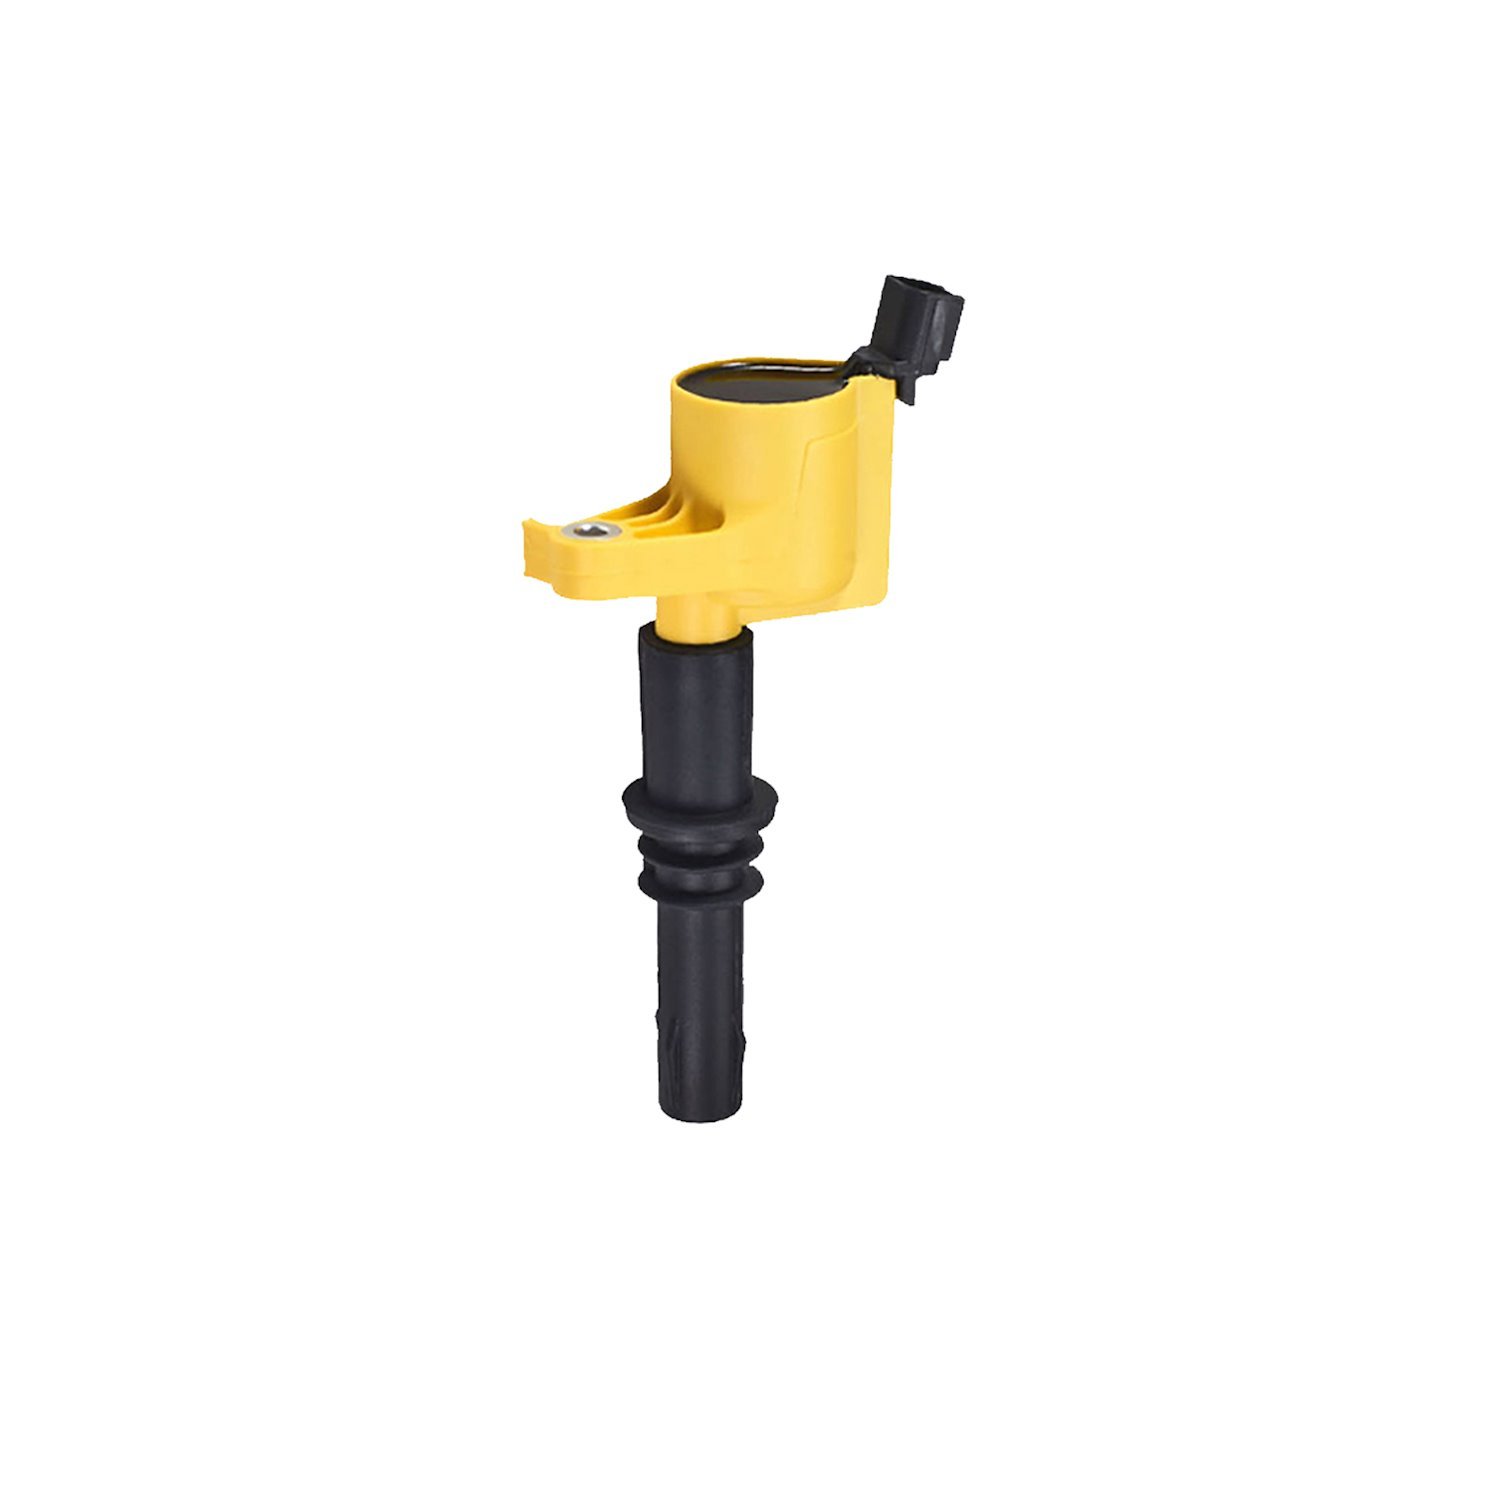 High-Performance Ignition Coil for 2004-2008 Ford F-150/Expedition V8 [Yellow]